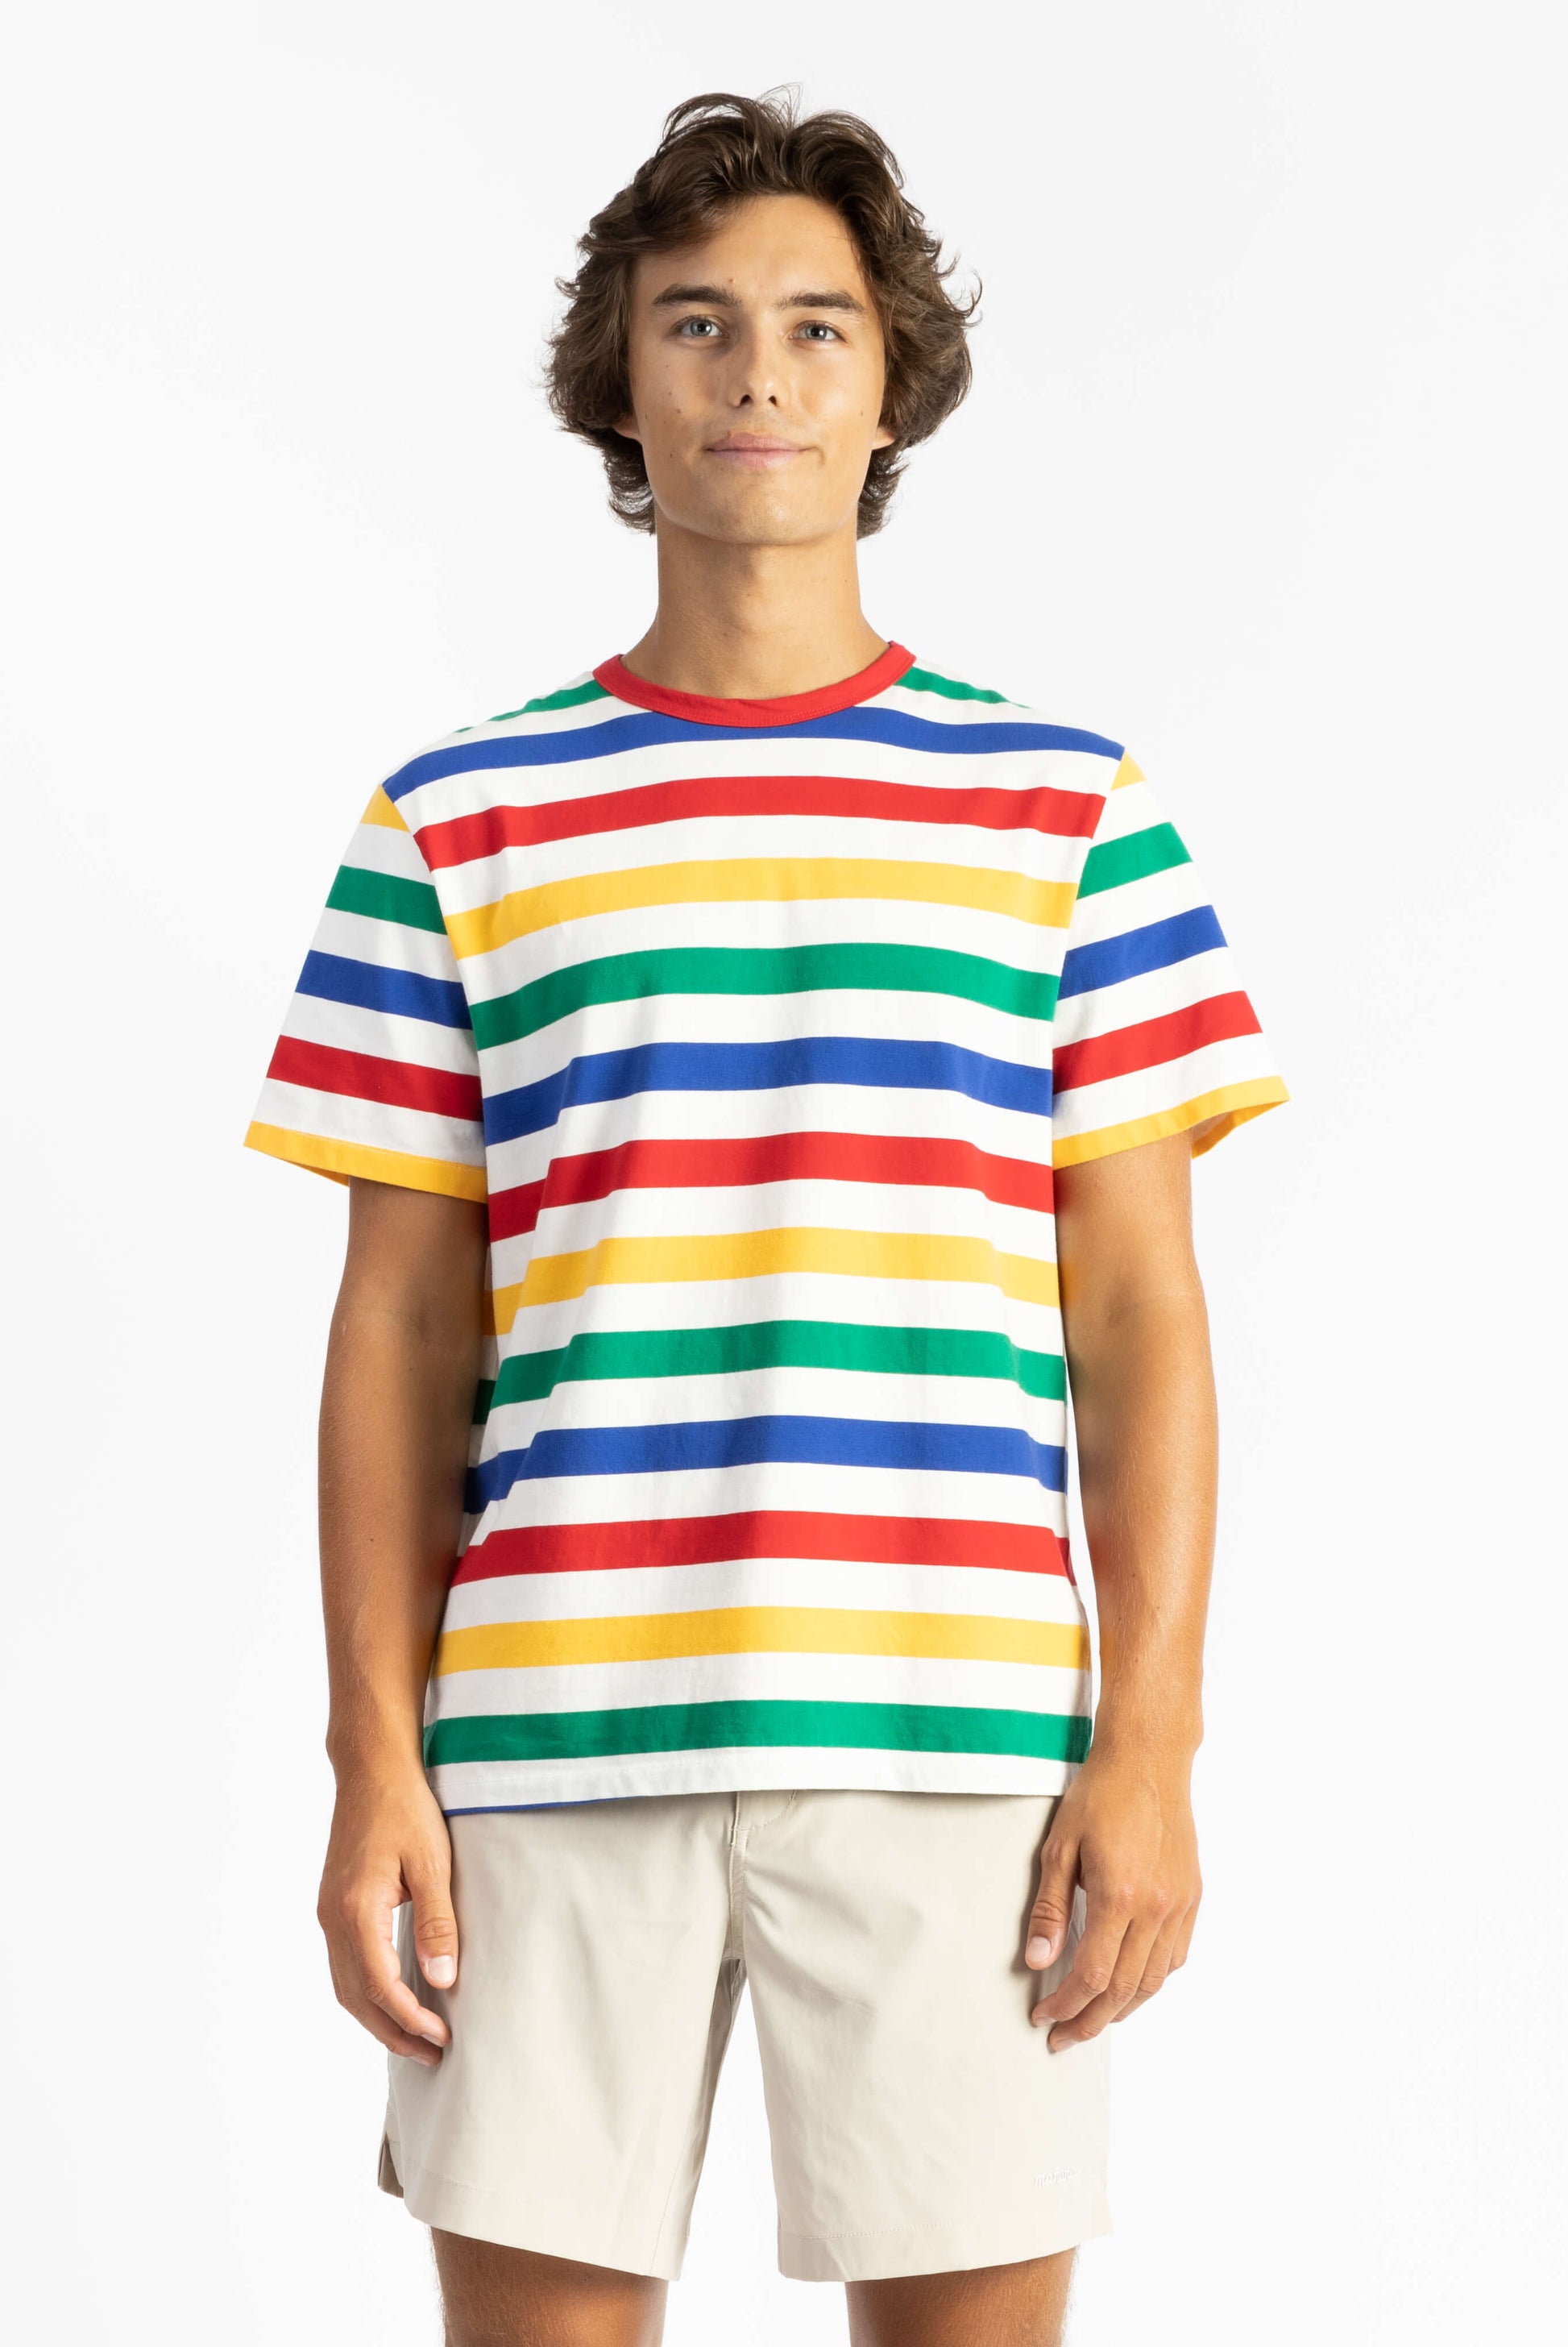 a man wearing a multi color tee shirt with big stripes and yellow shorts